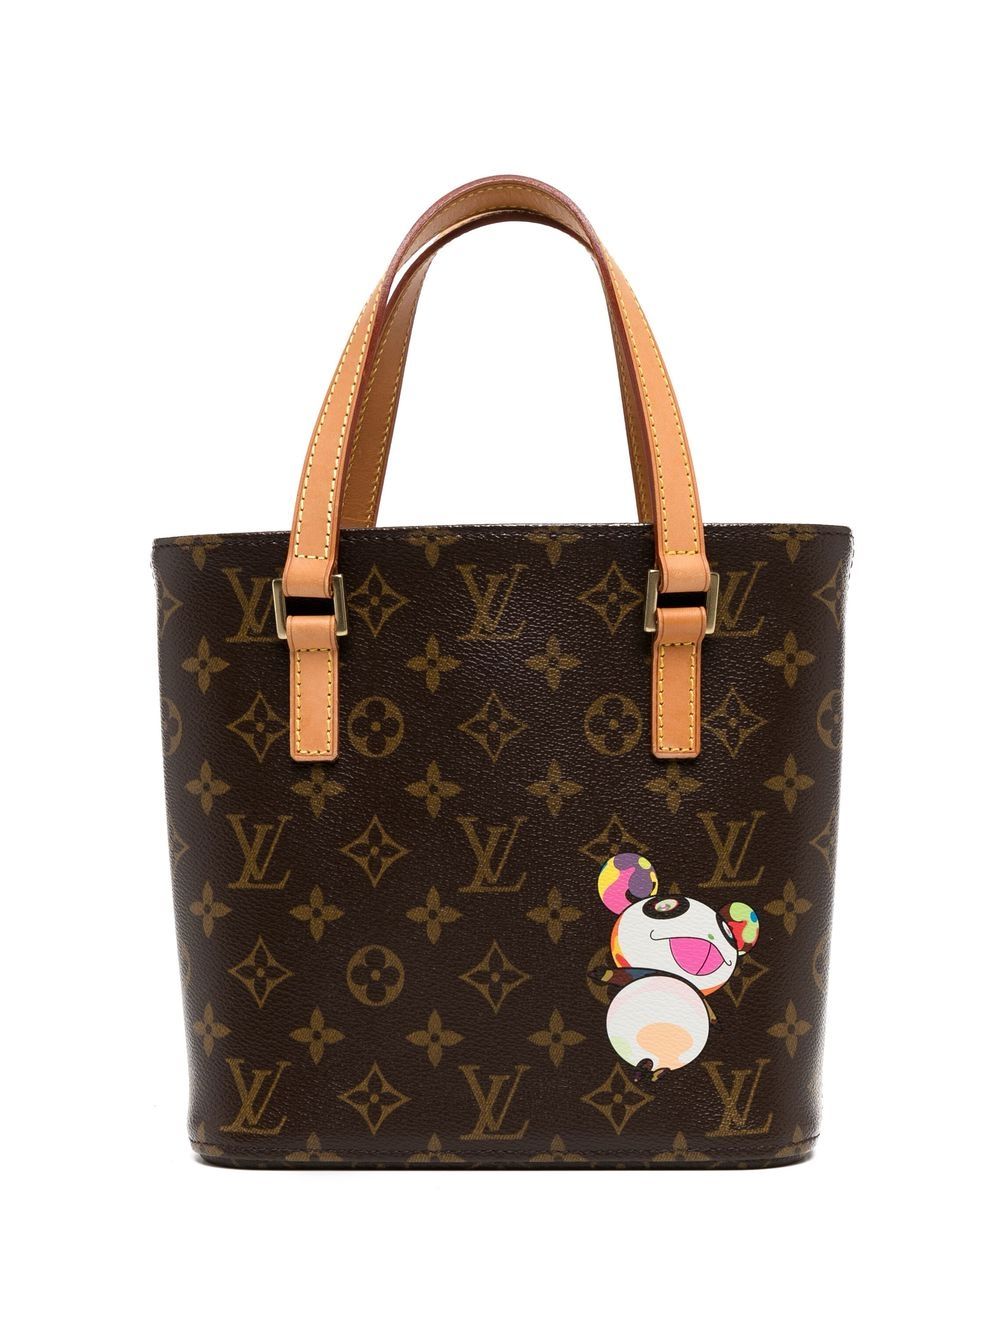 Louis Vuitton Pre-Owned 2004 pre-owned Vavin PM Handtasche - Braun von Louis Vuitton Pre-Owned